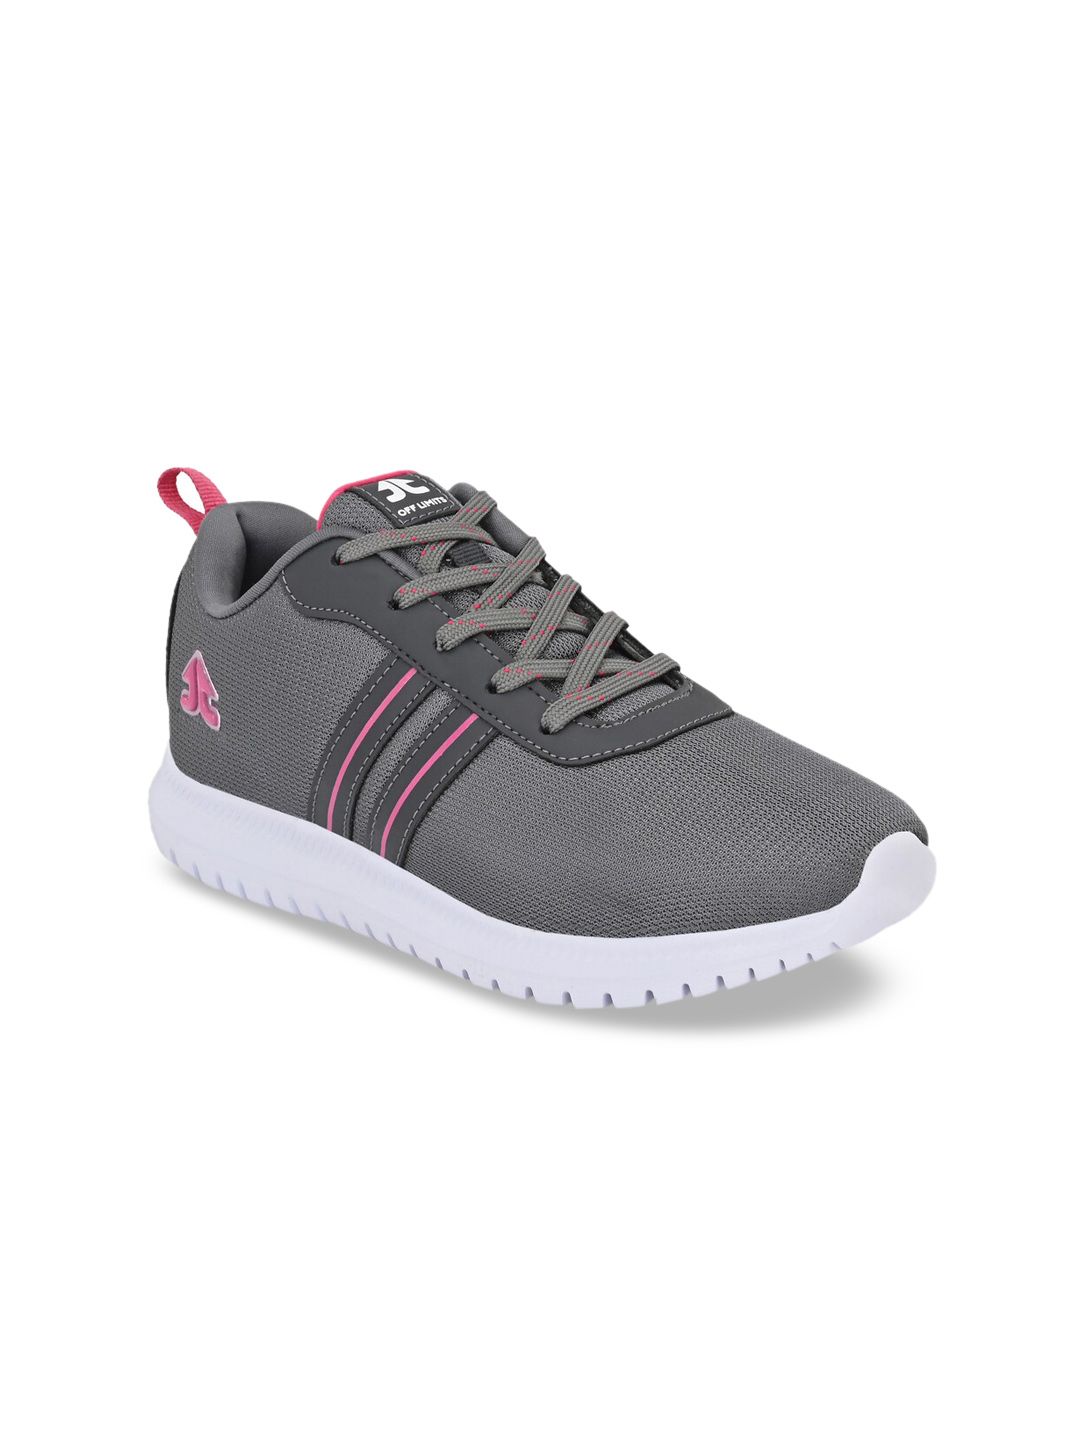 OFF LIMITS Women Grey Mesh Running Shoes Price in India